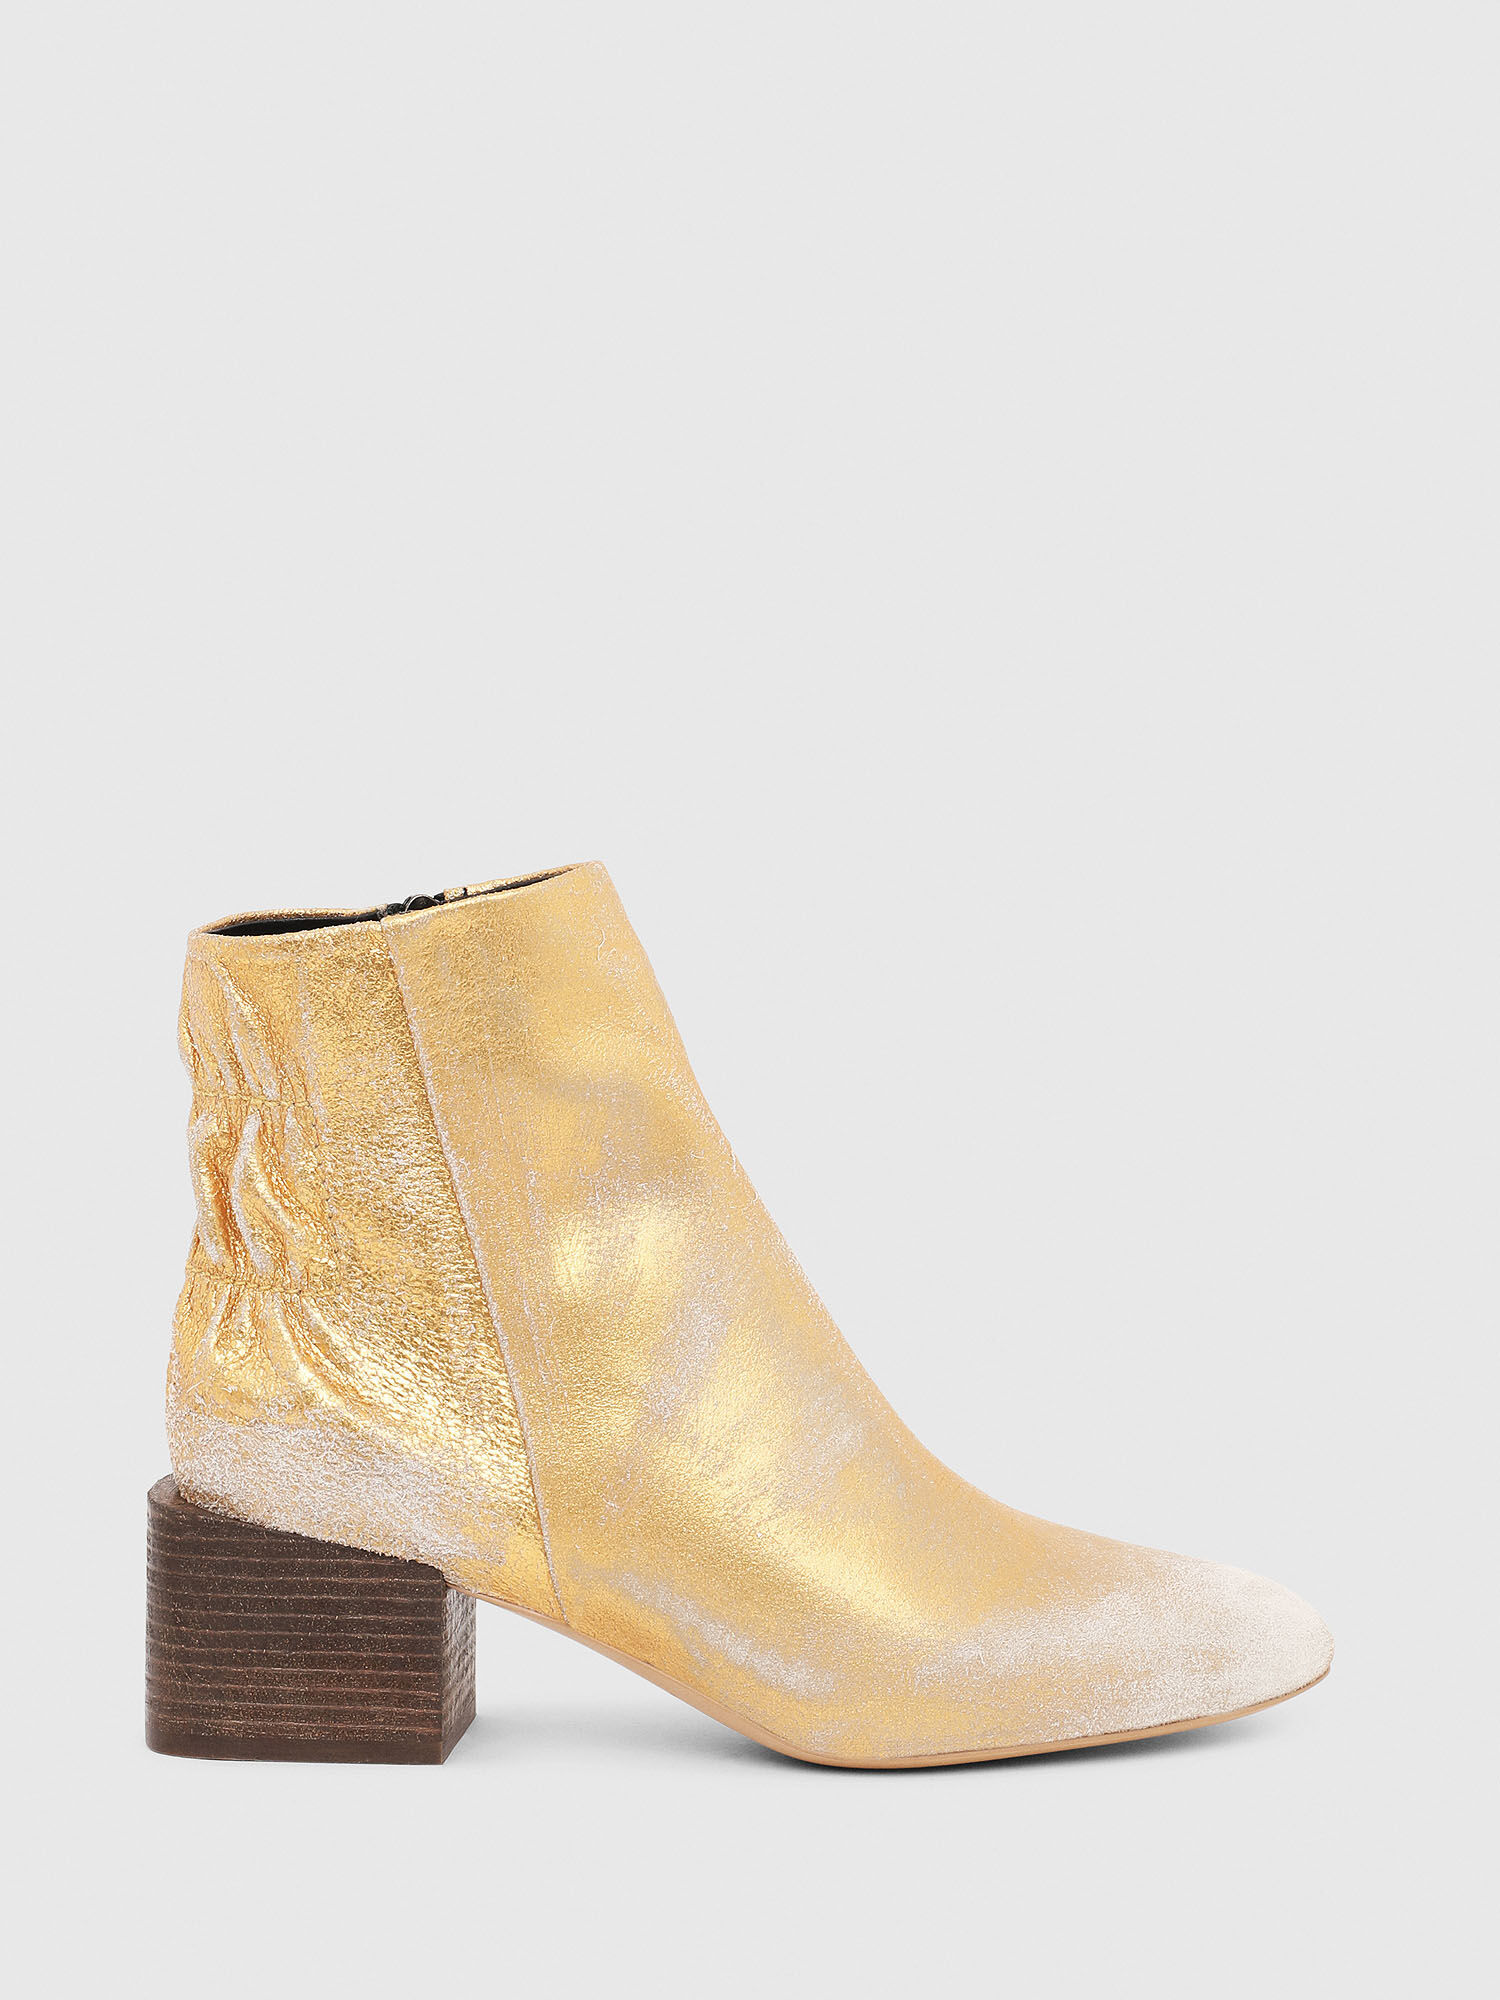 JAYNET MAB Woman: Ankle boot in 